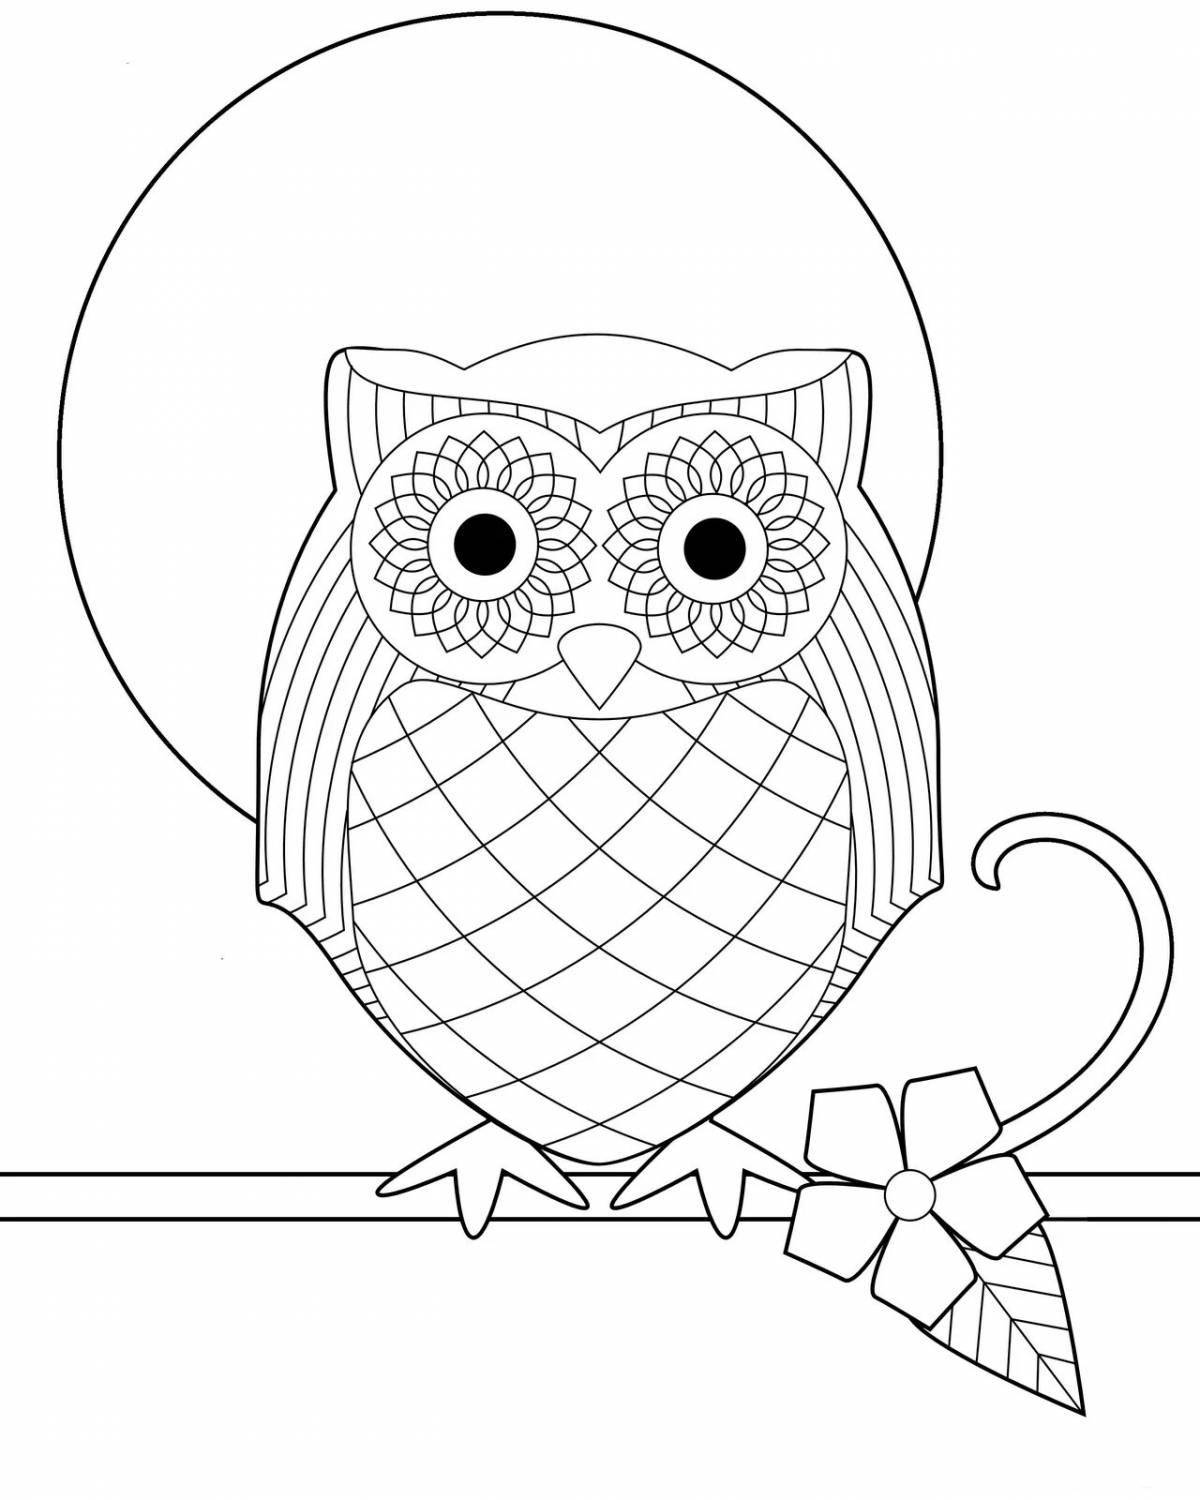 Coloring book funny cute owl